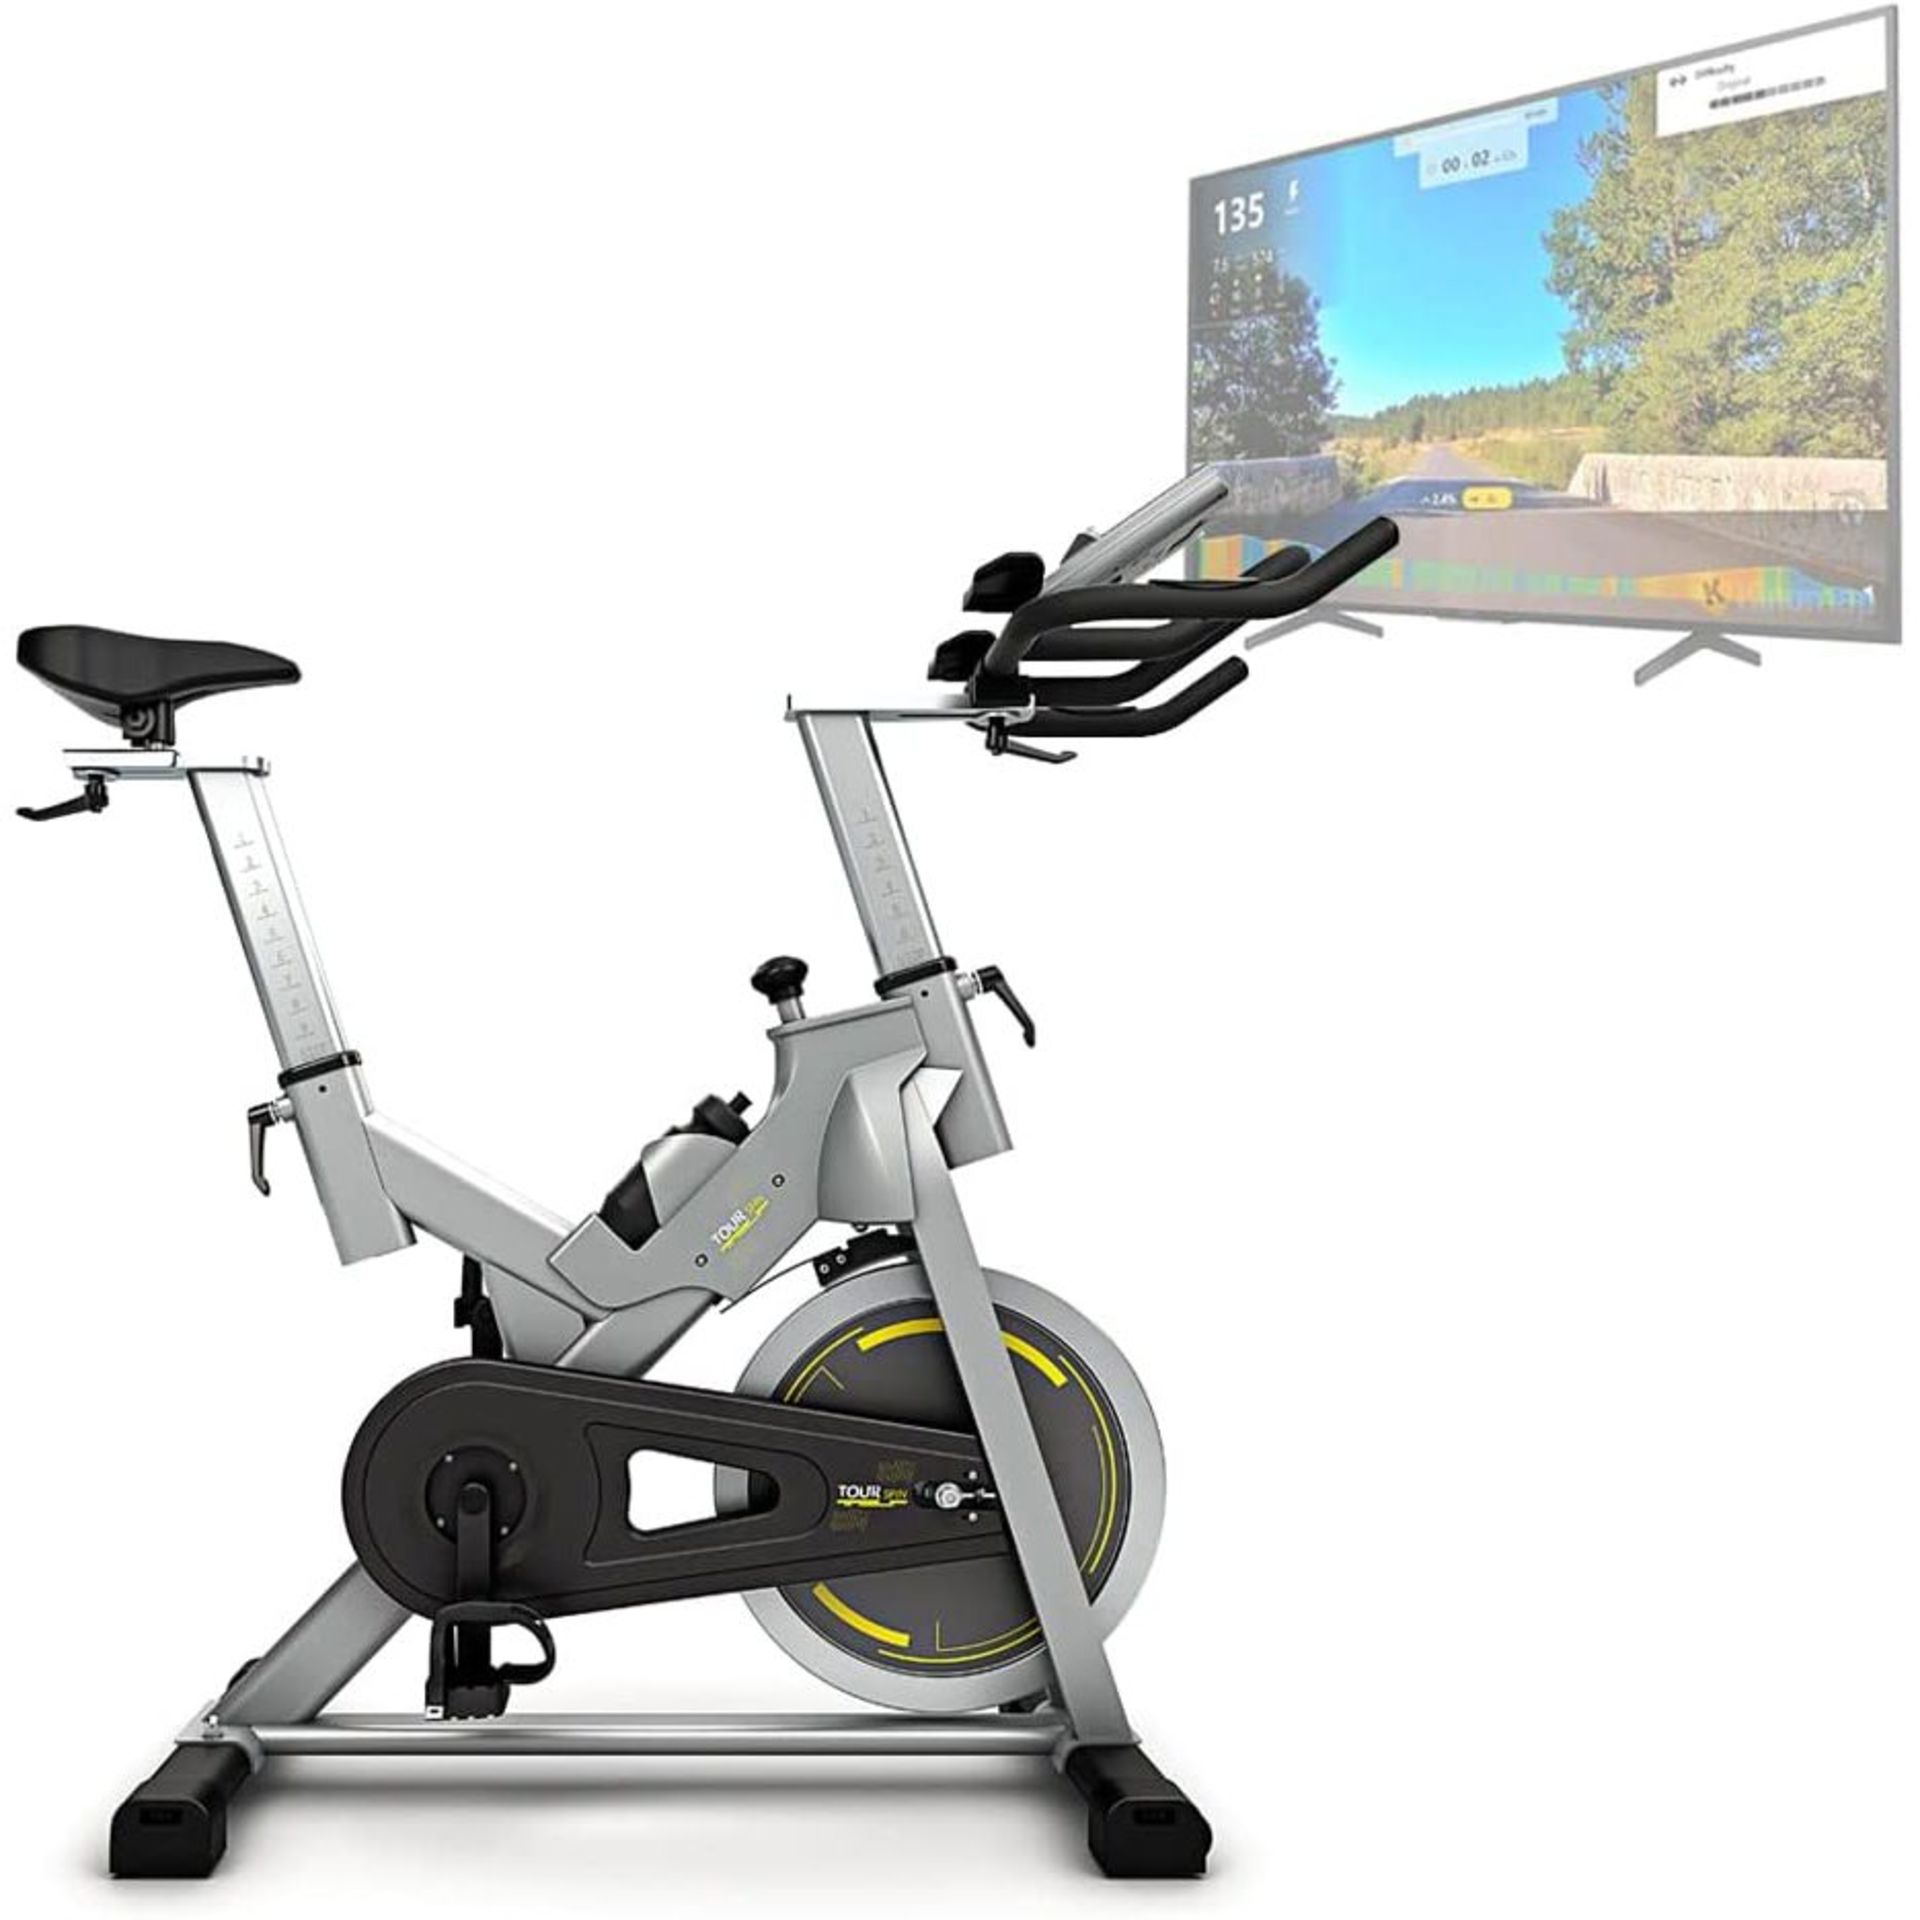 Bluefin Fitness Tour SP Exercise Bike RRP 499.00